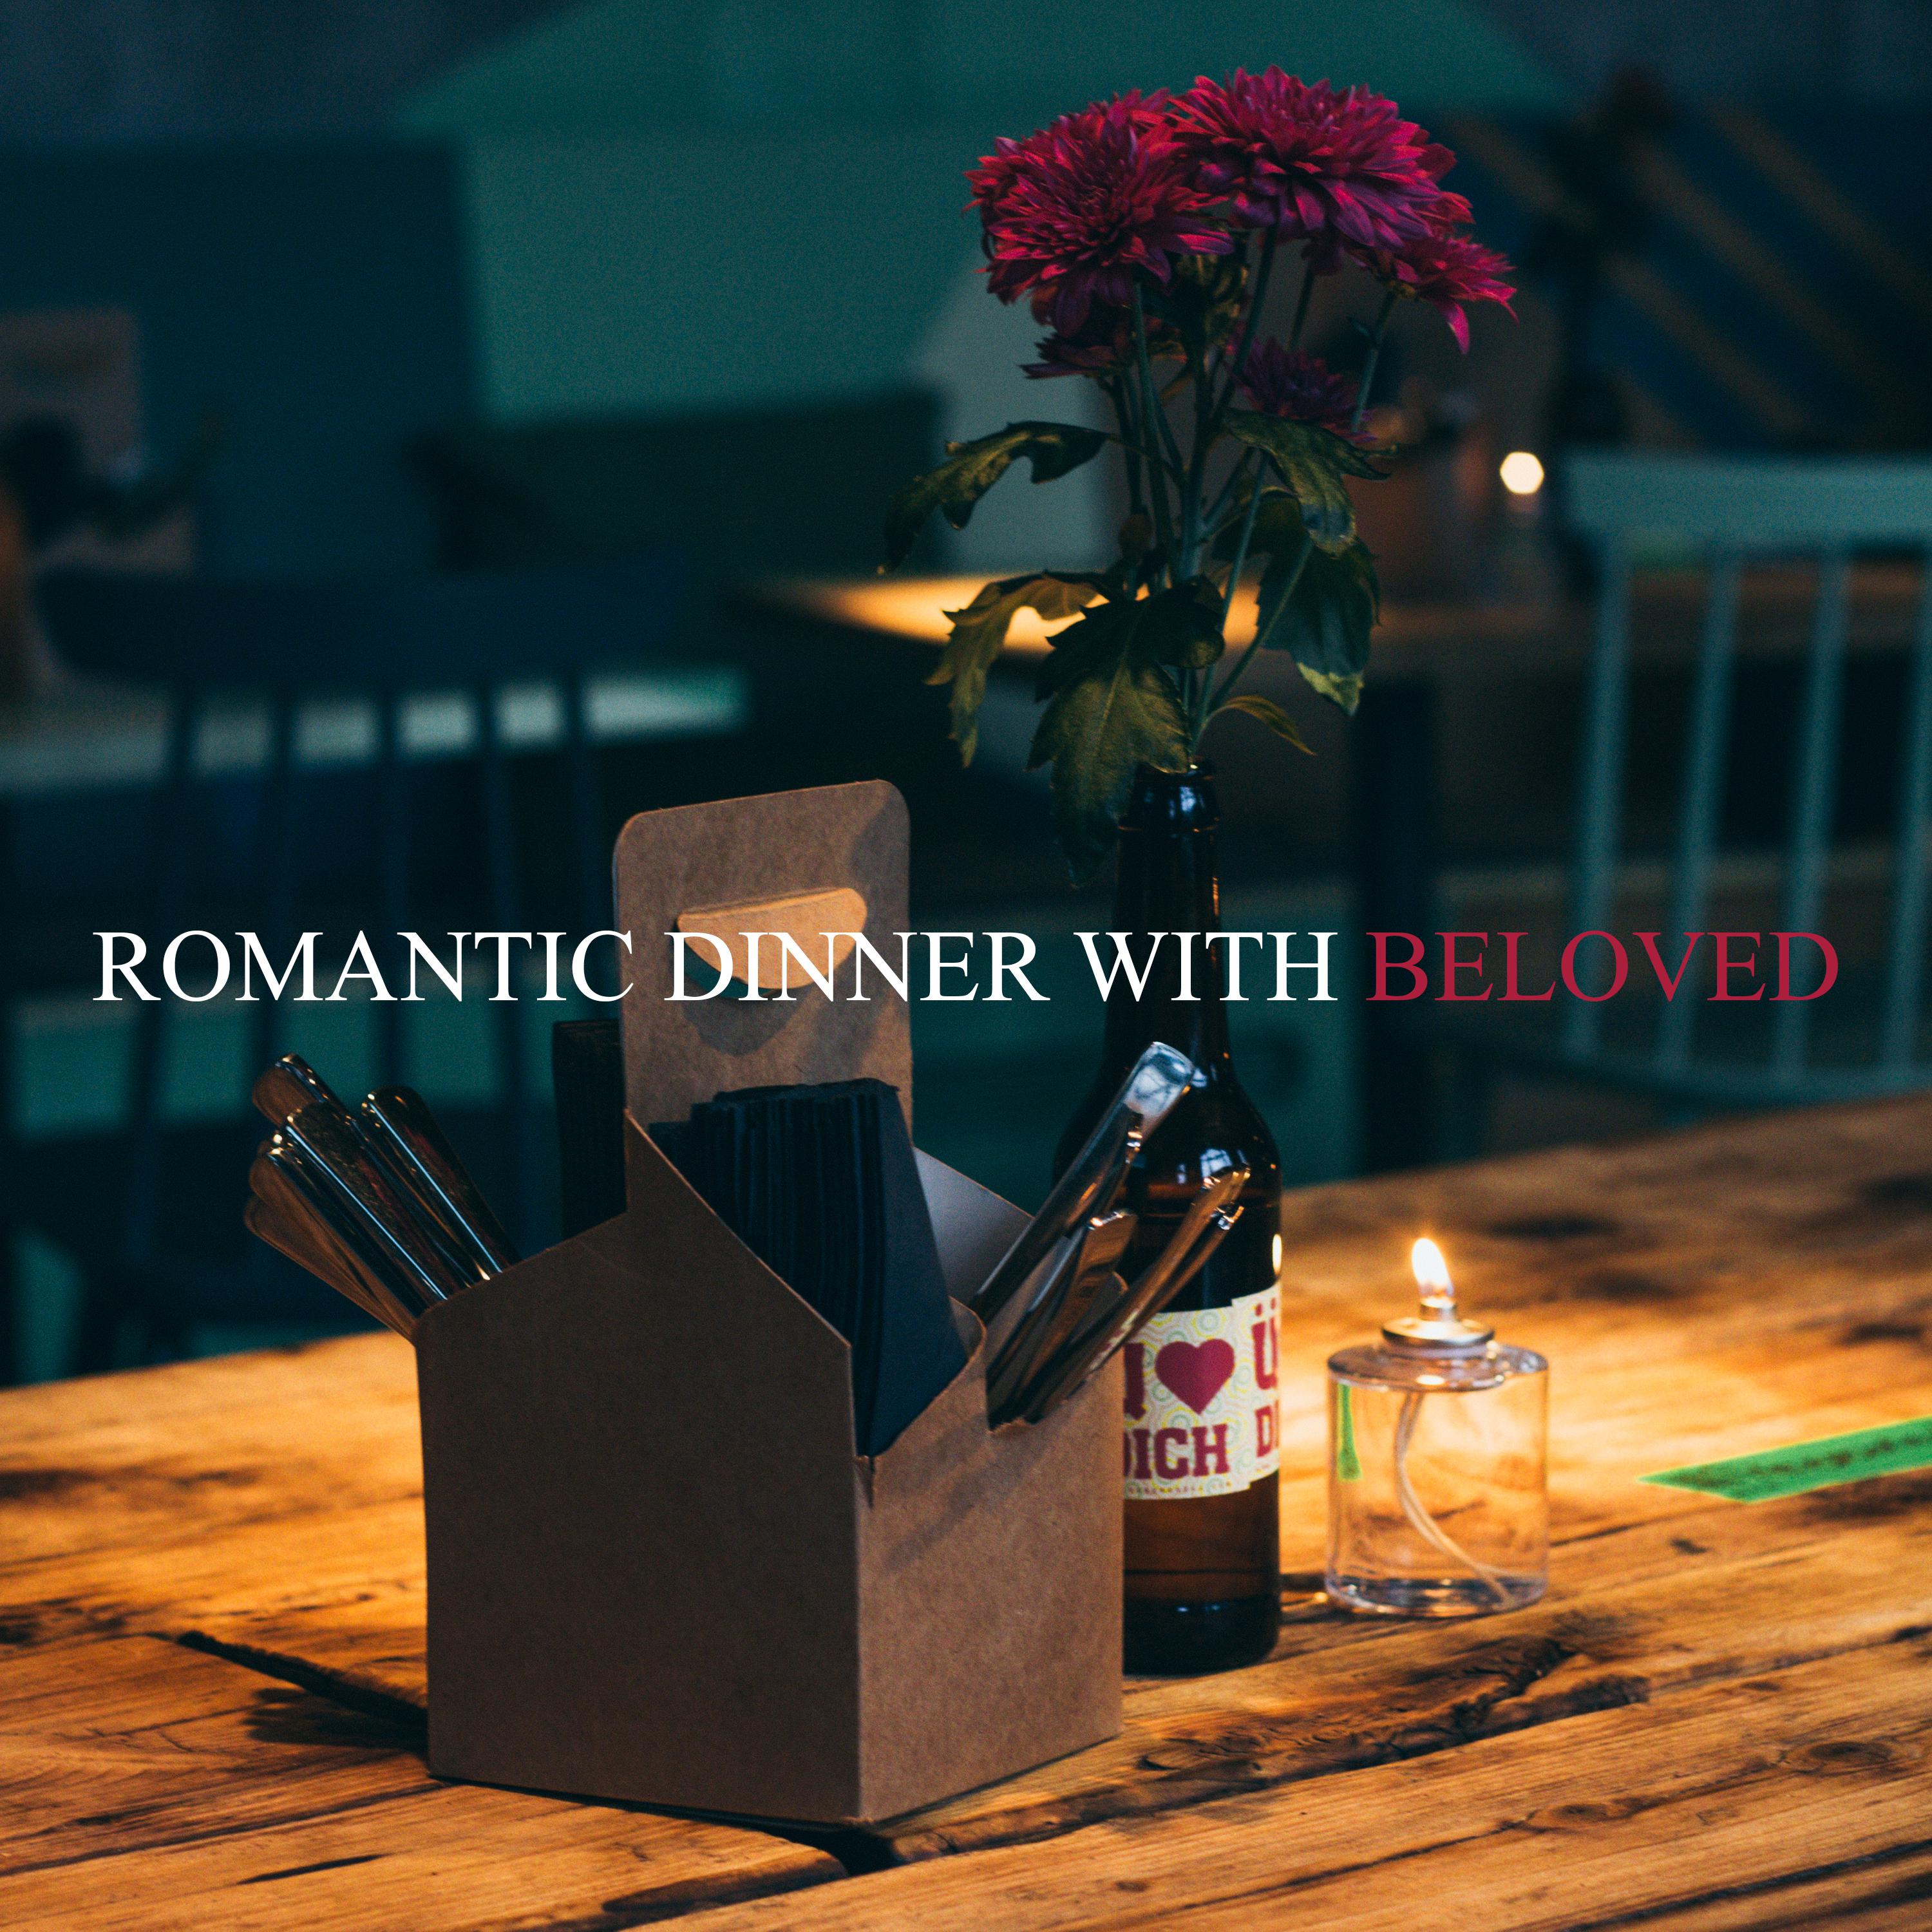 Romantic Dinner with Beloved - Compilation of Jazz Songs for a Successful Date, Anniversary or Romantic Dinner Just for Two